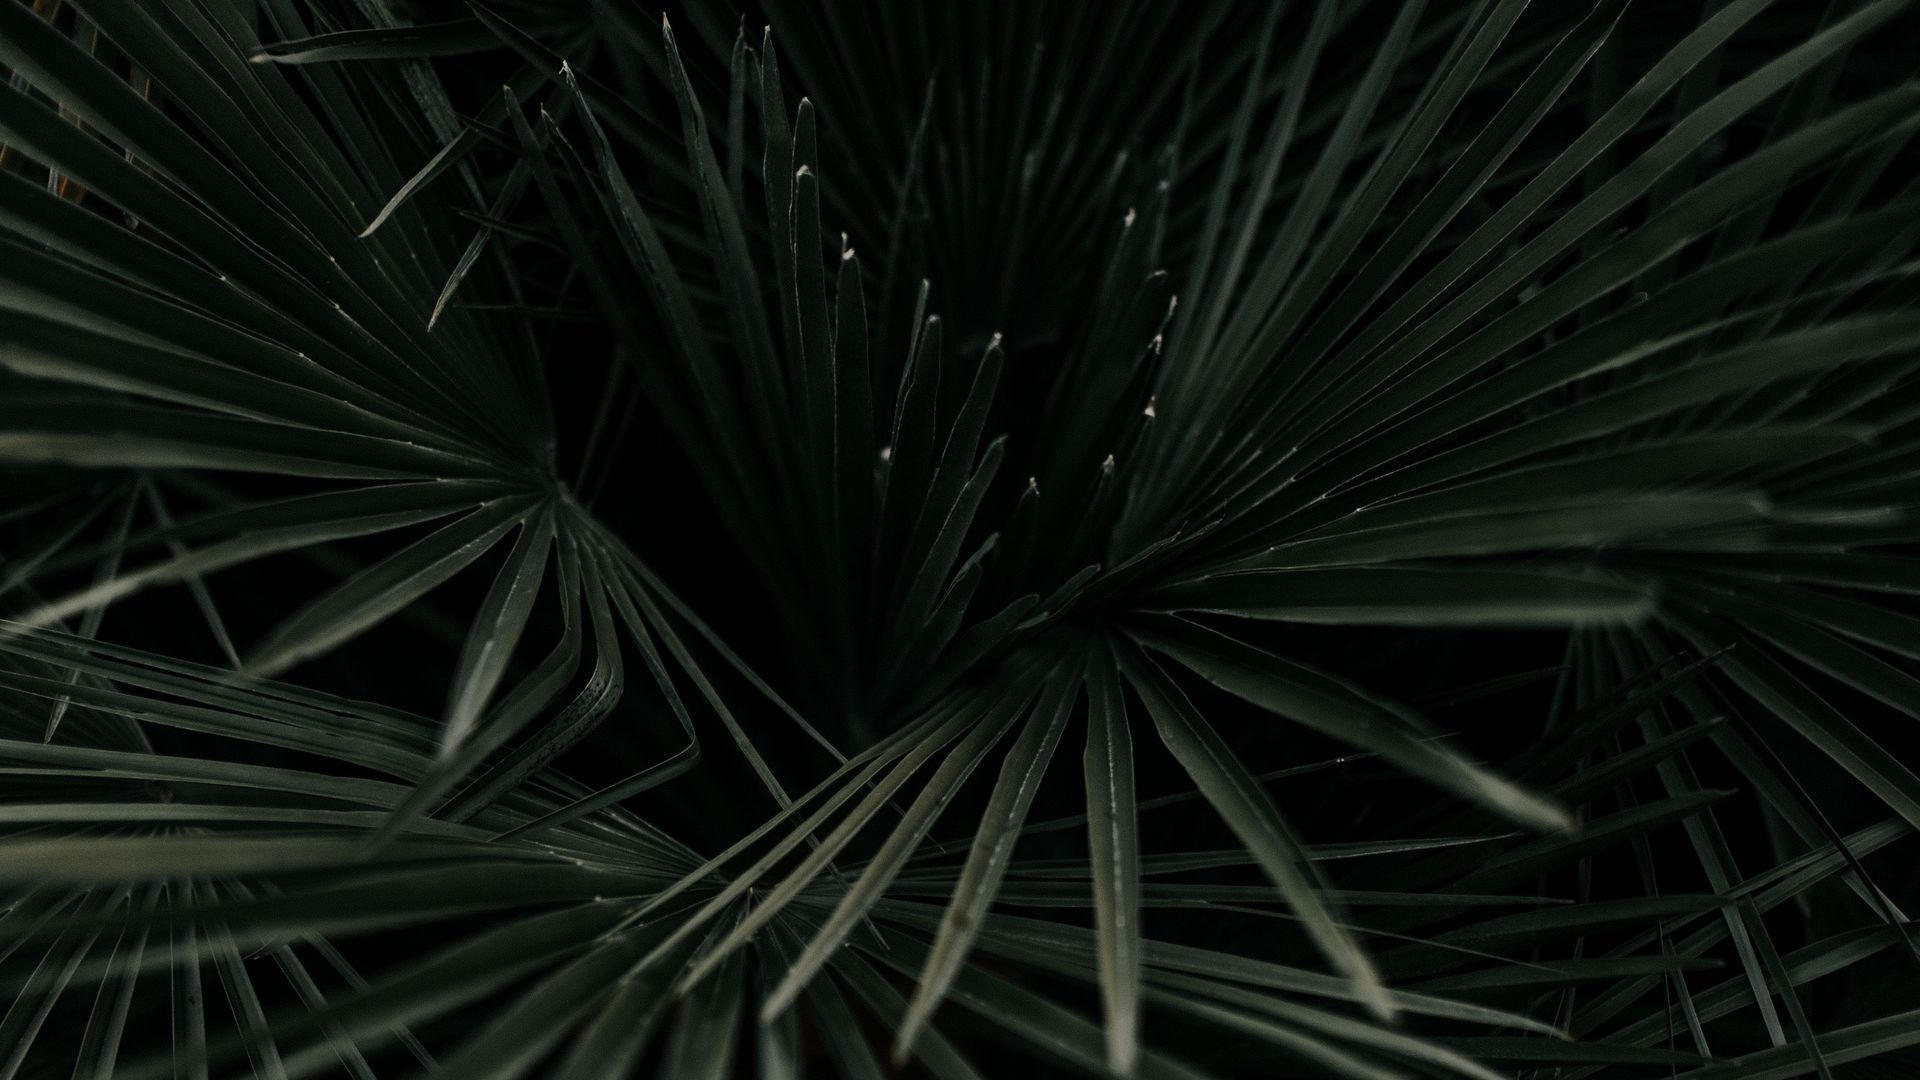 Download wallpaper 1920x1080 leaves, palm, tropical, branches, dark green, plant full hd, hdtv, fhd, 1080p HD background